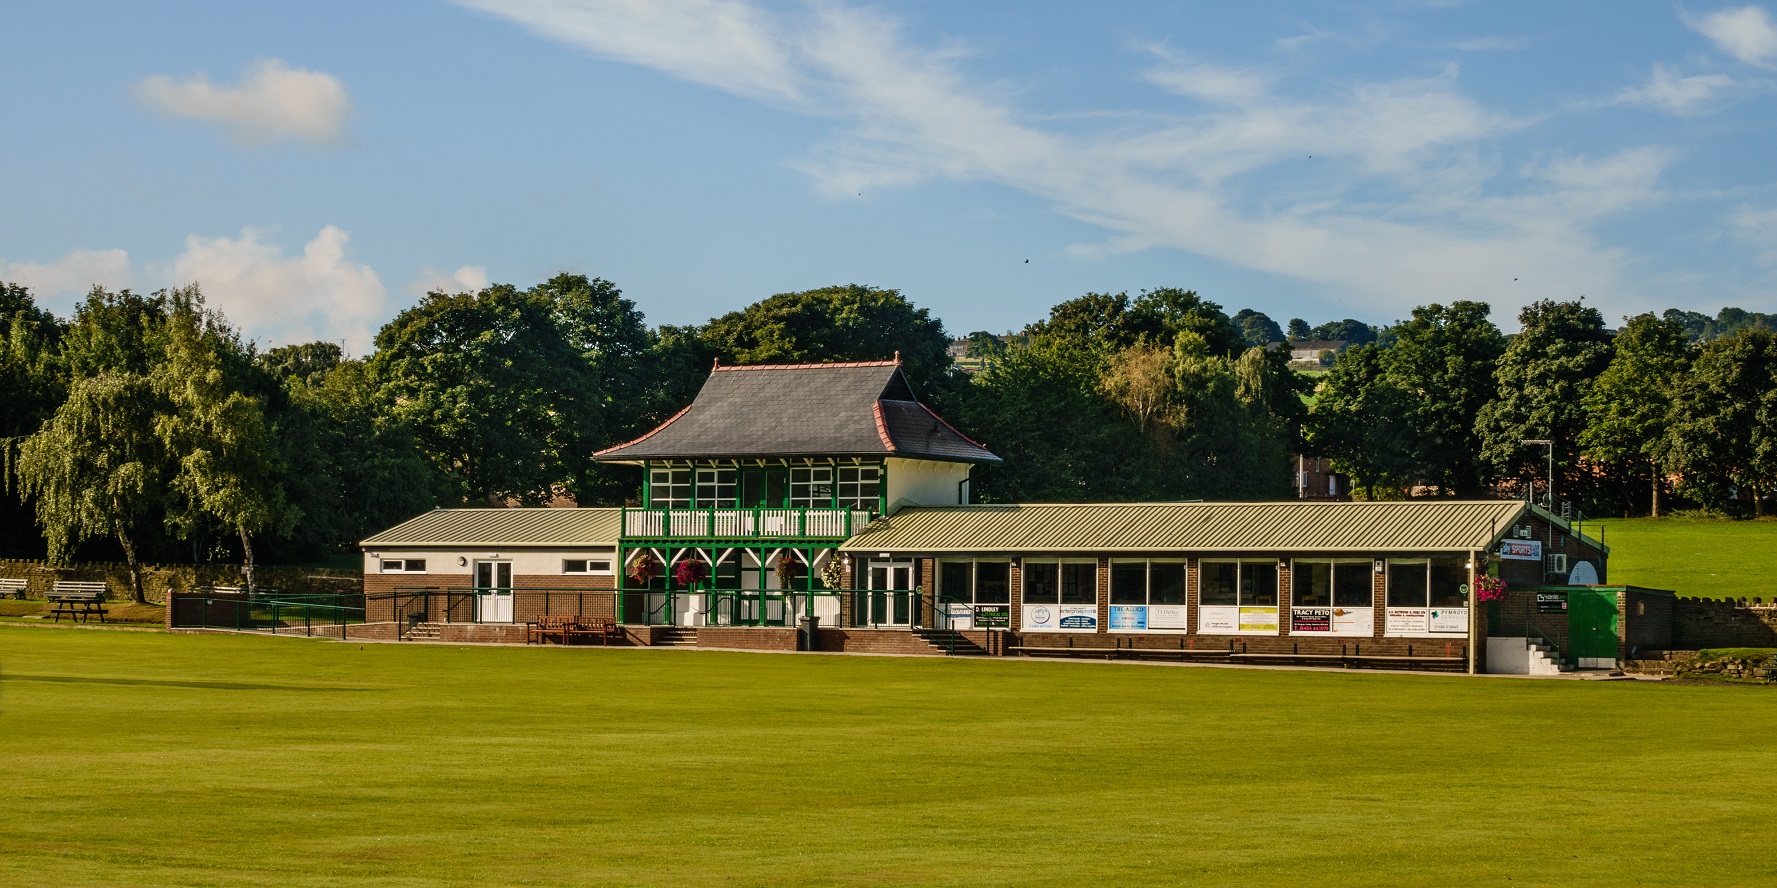 Incident at Honley CC Statement